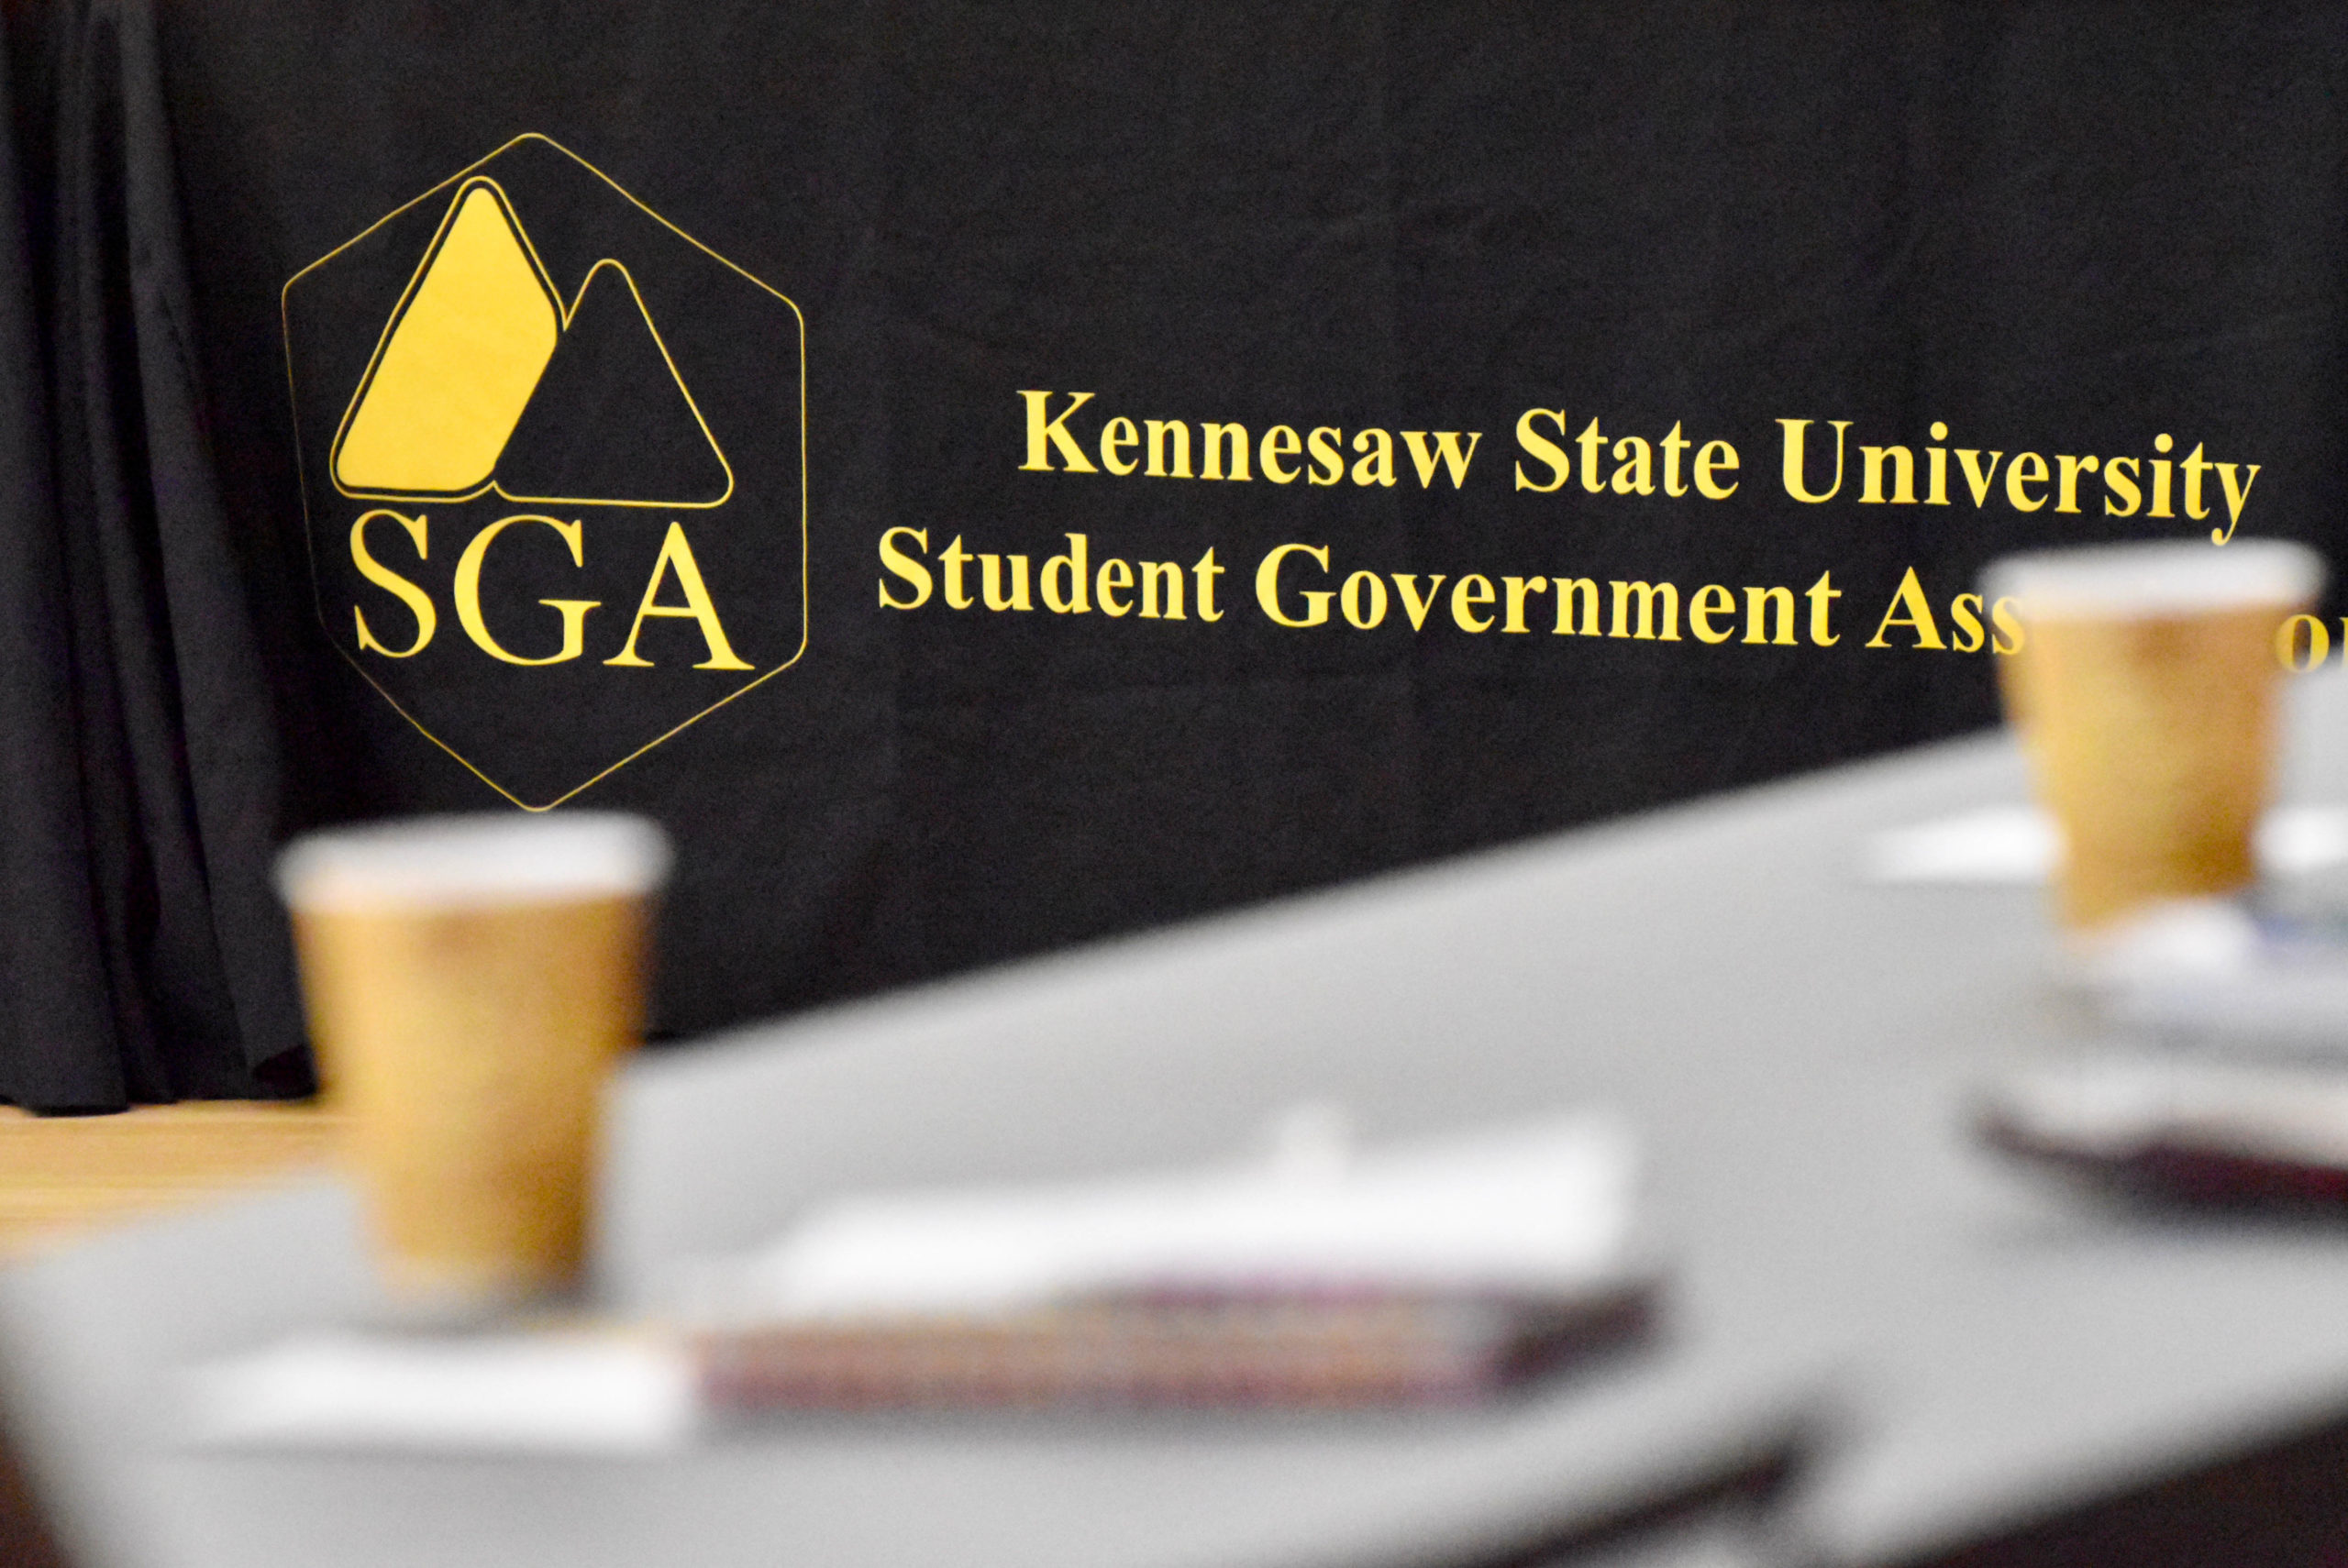 New SGA president touts transparency as central value of administration